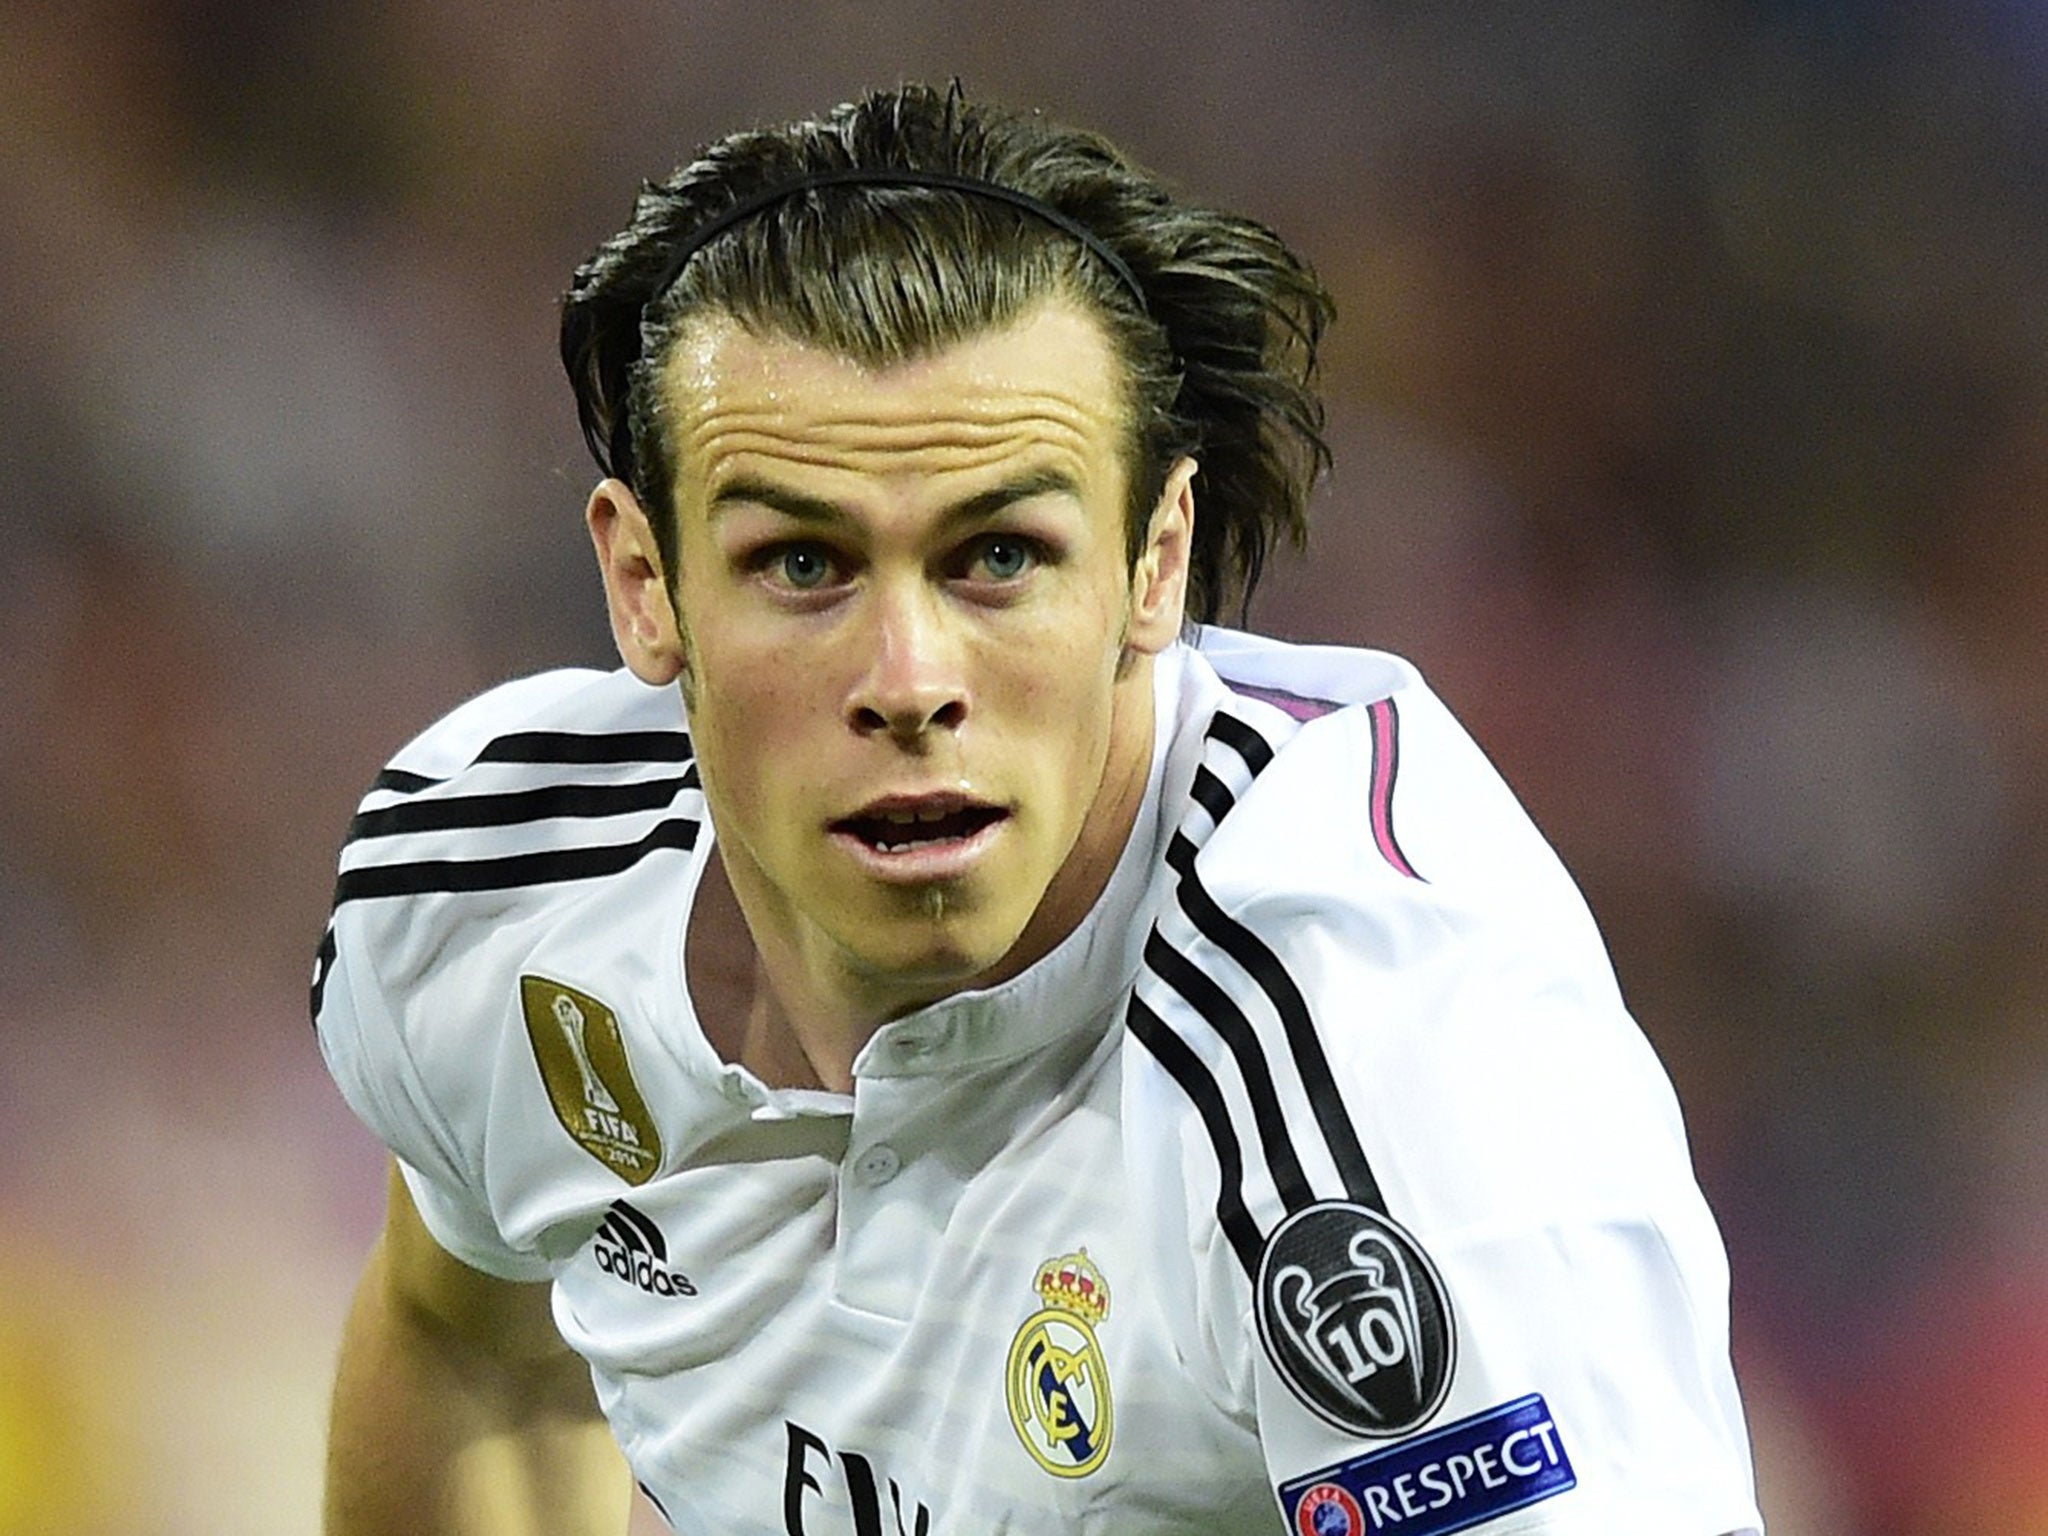 Gareth Bale has struggled to play well consistently during his time at Real Madrid.